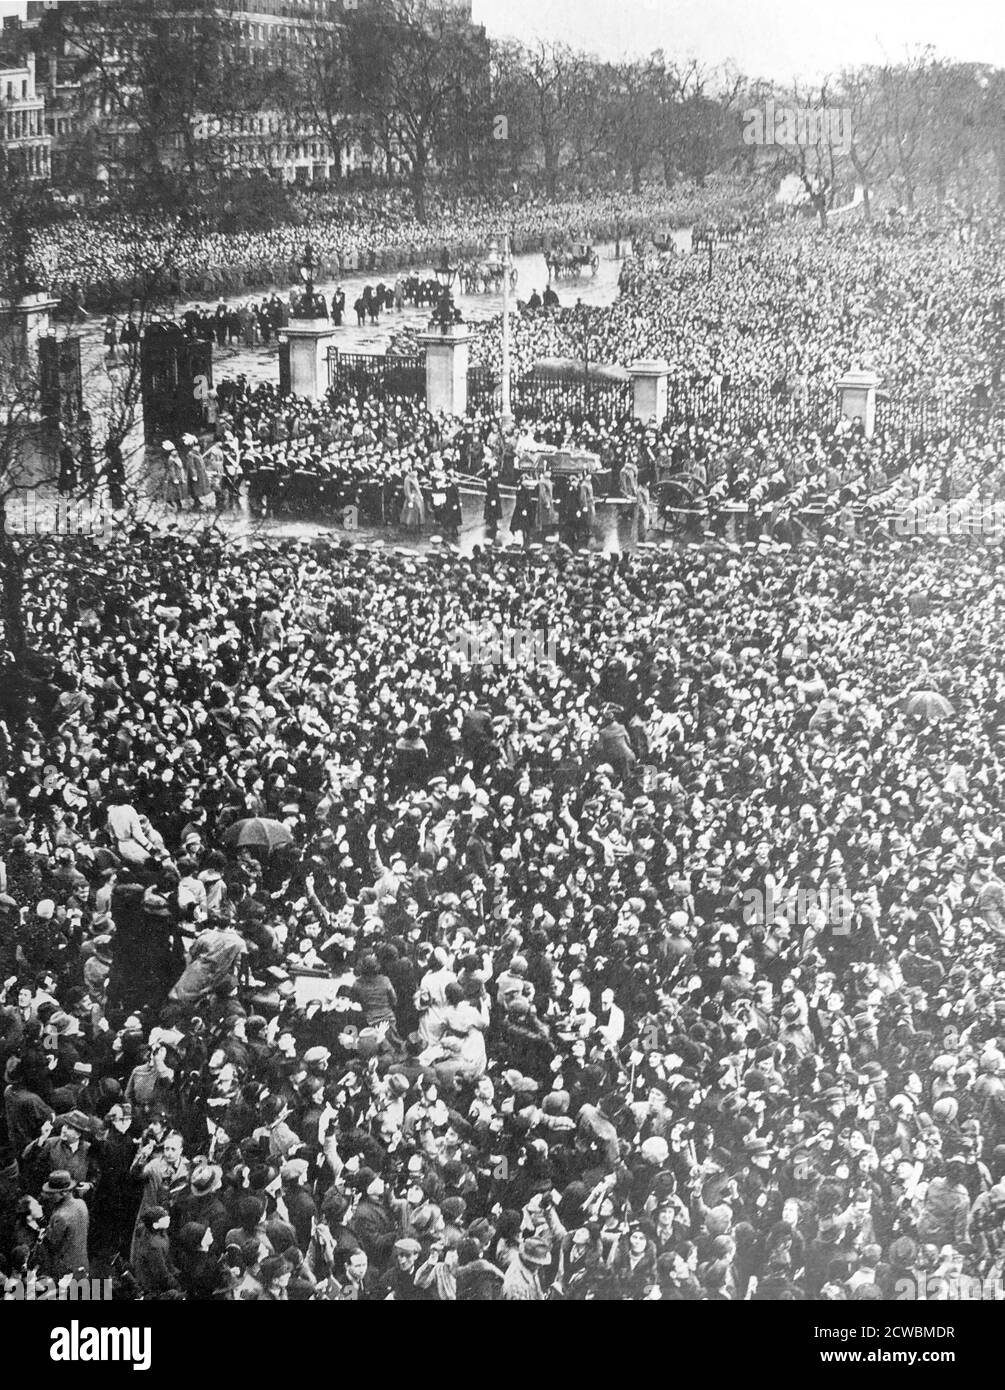 Black and white photograph of the funeral of King George V of the United Kingdom (1865-1936); thousands of people line the streets of London to view the procession. Stock Photo